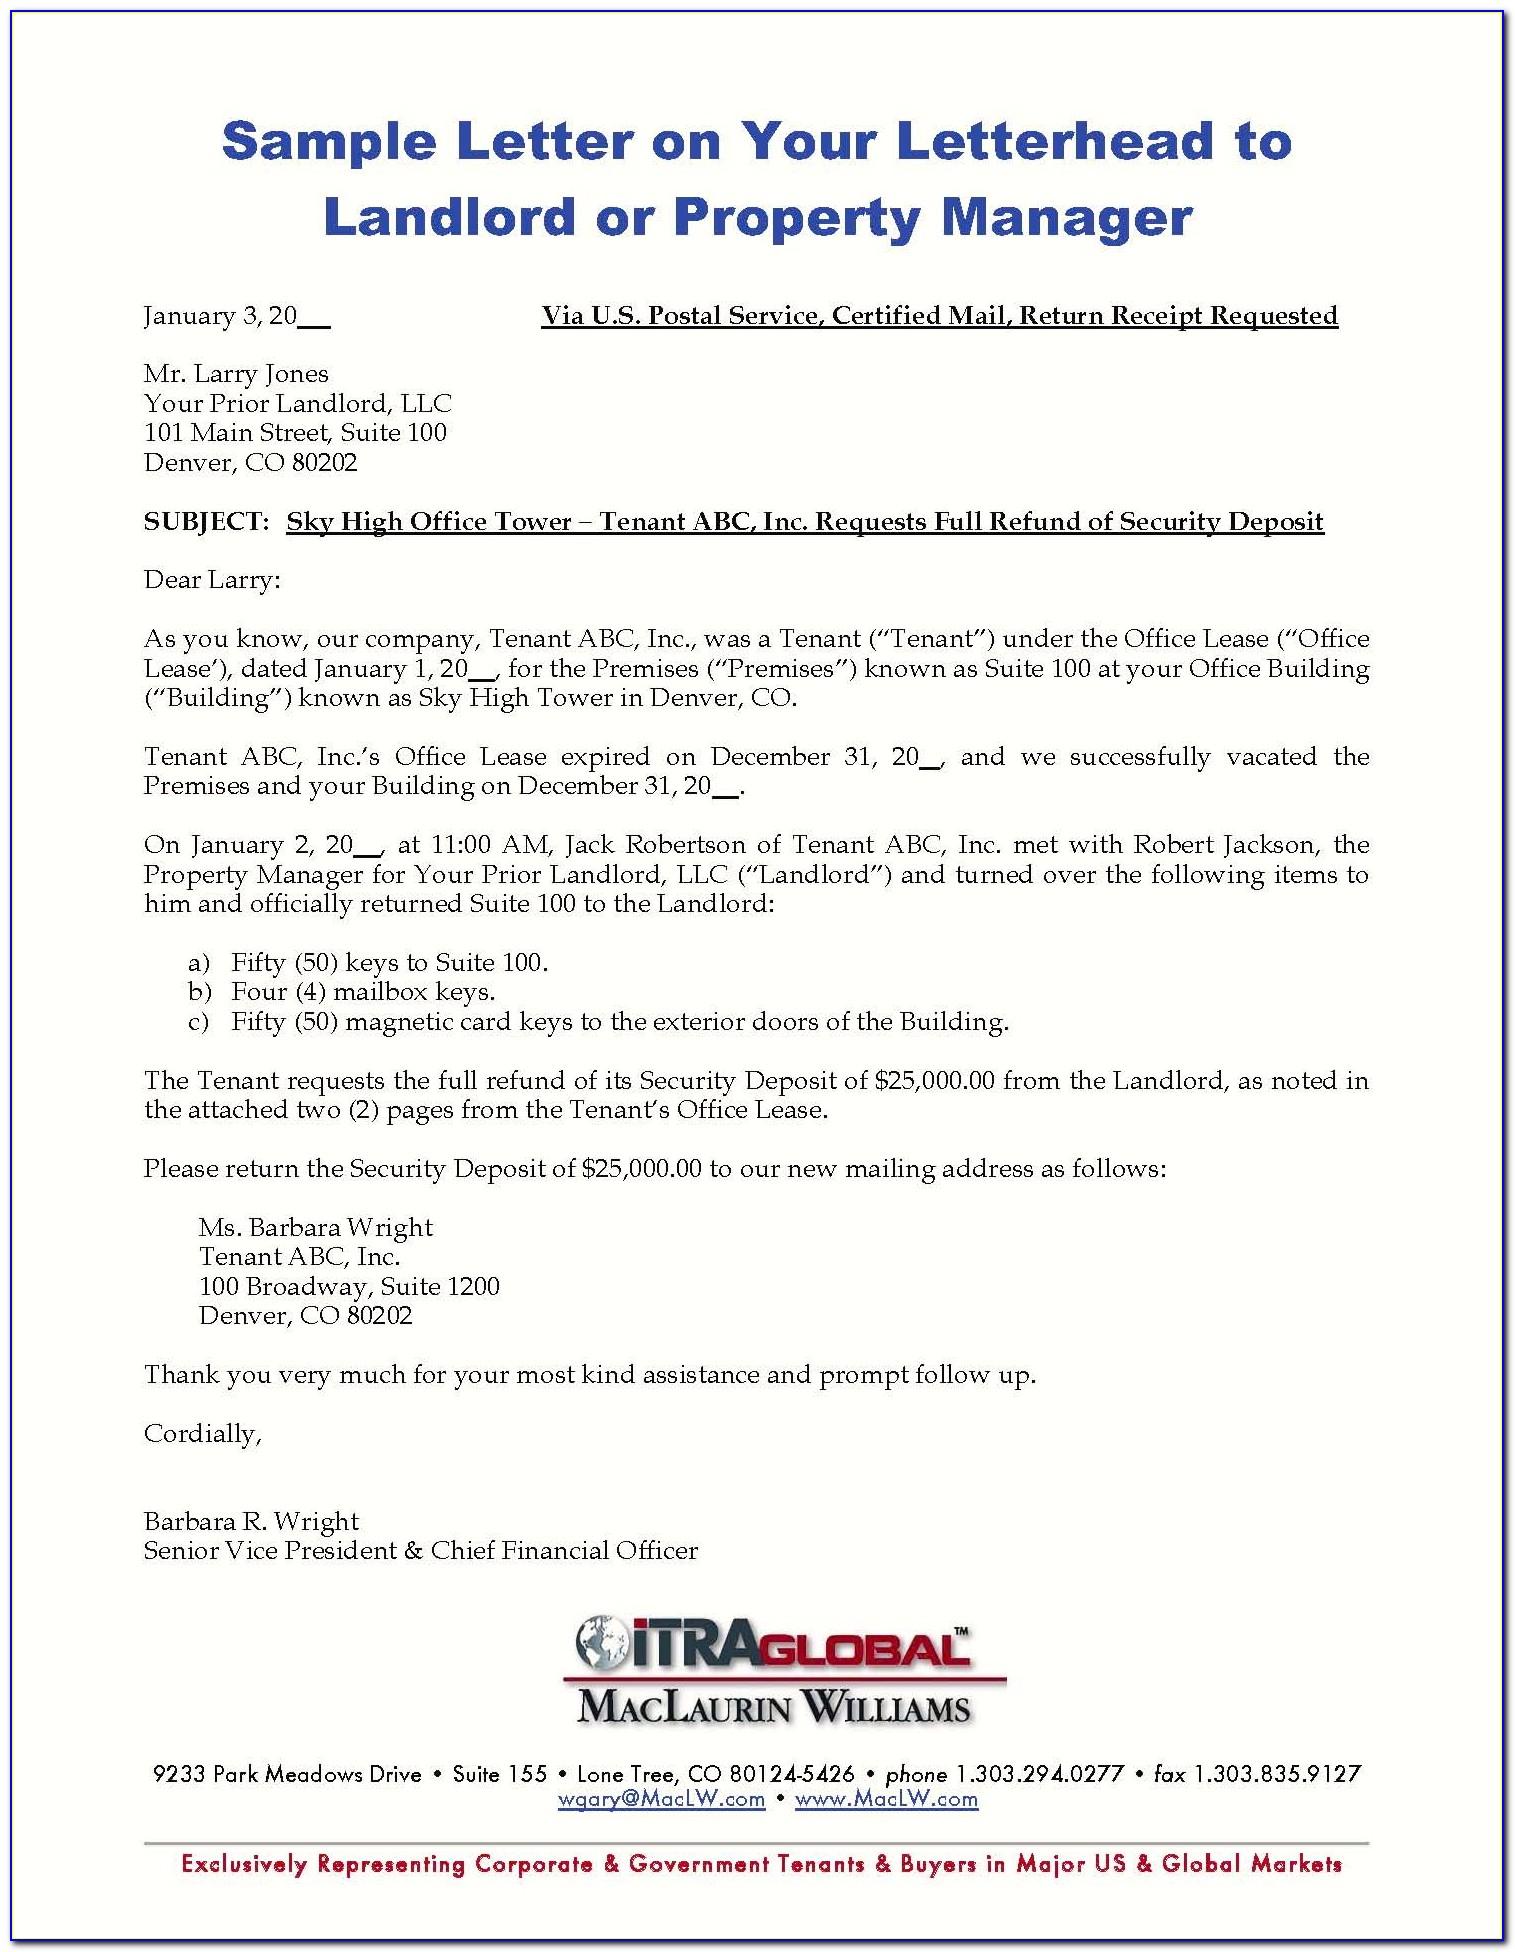 Security Deposit Refund Letter Template